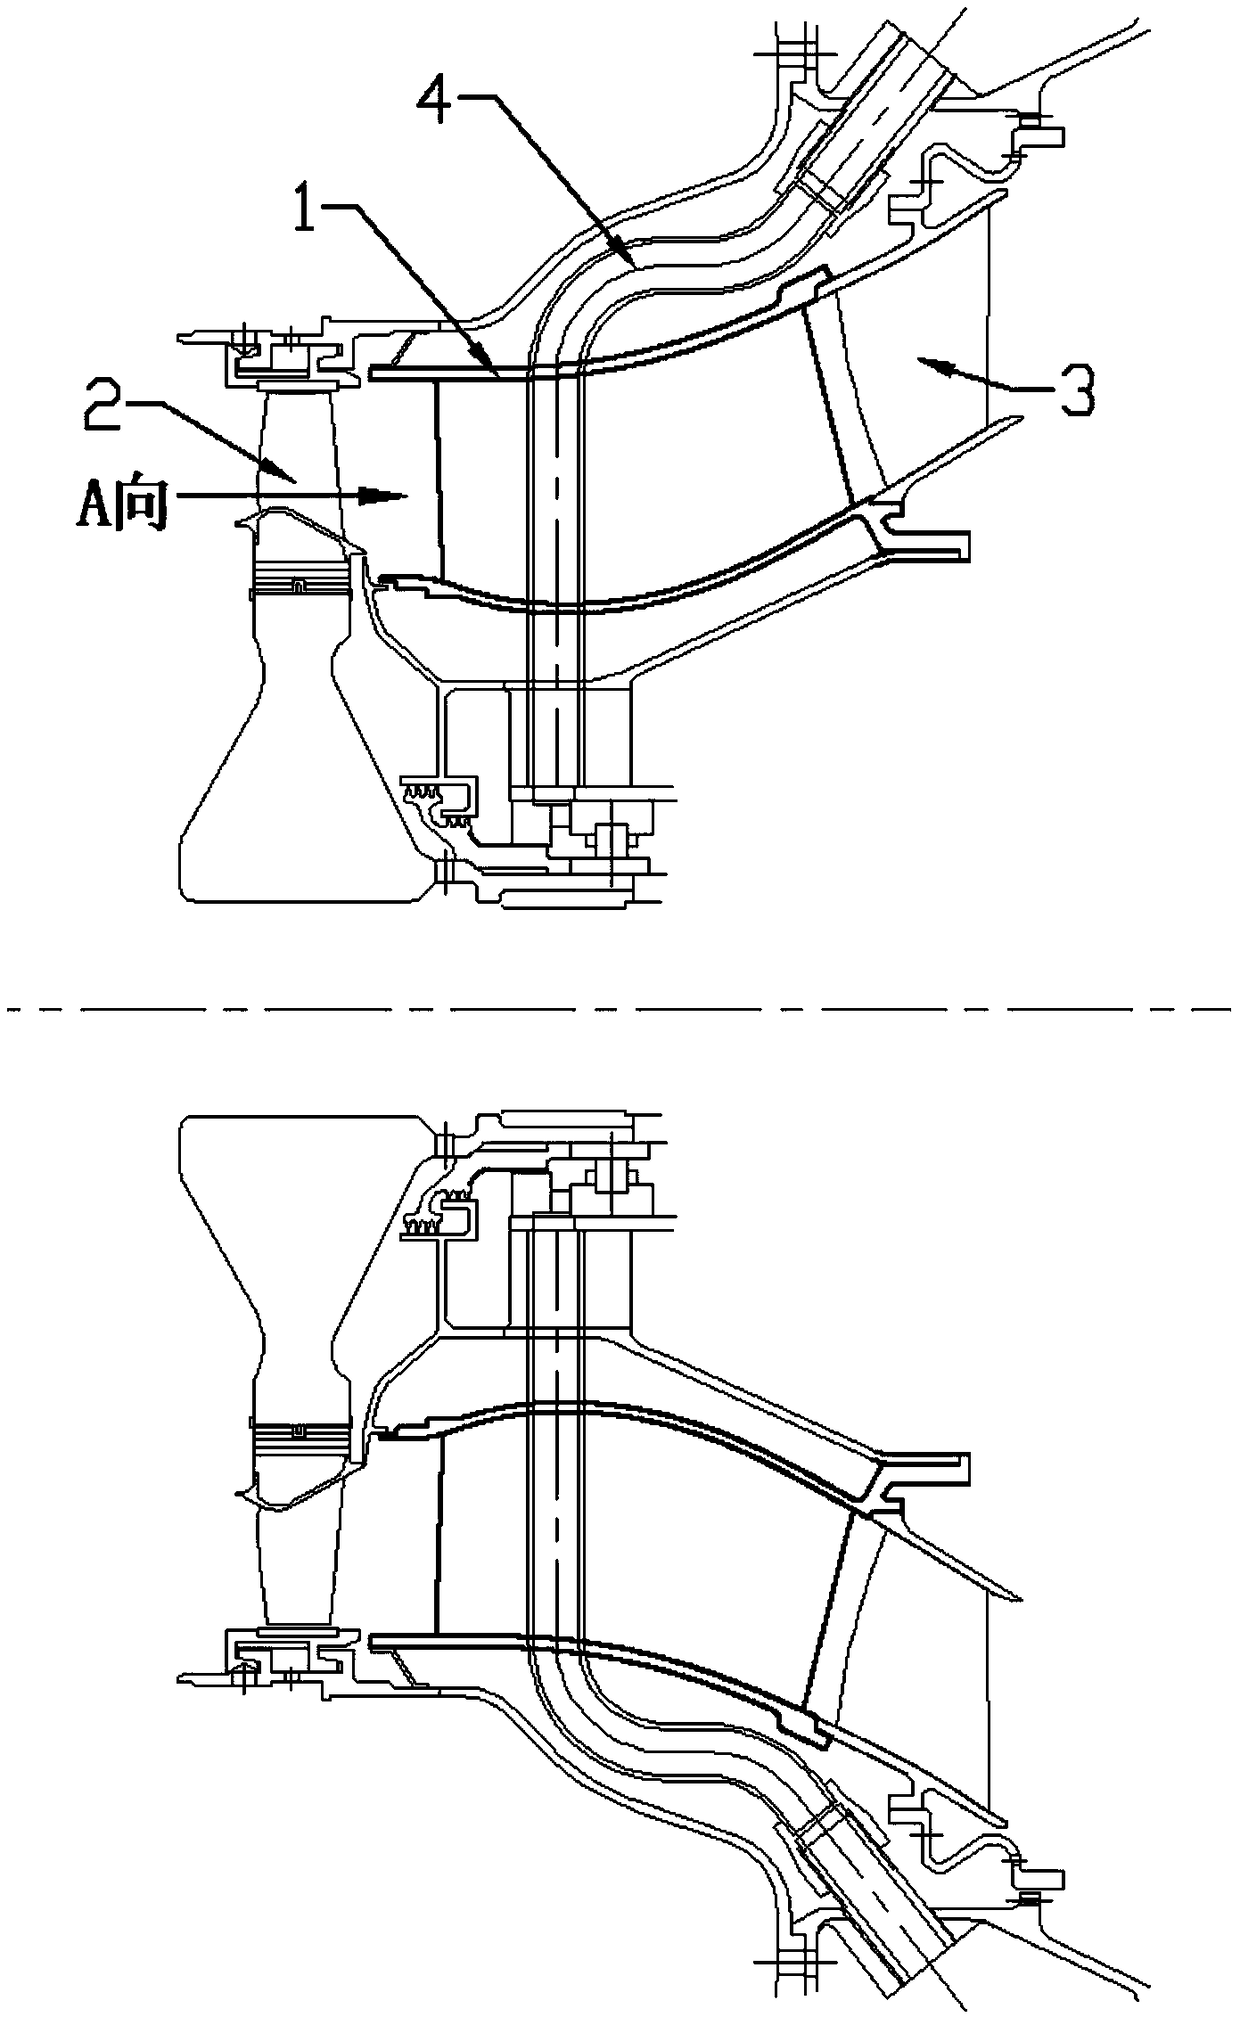 An engine fuel supply support plate casing structure and an engine comprising the structure